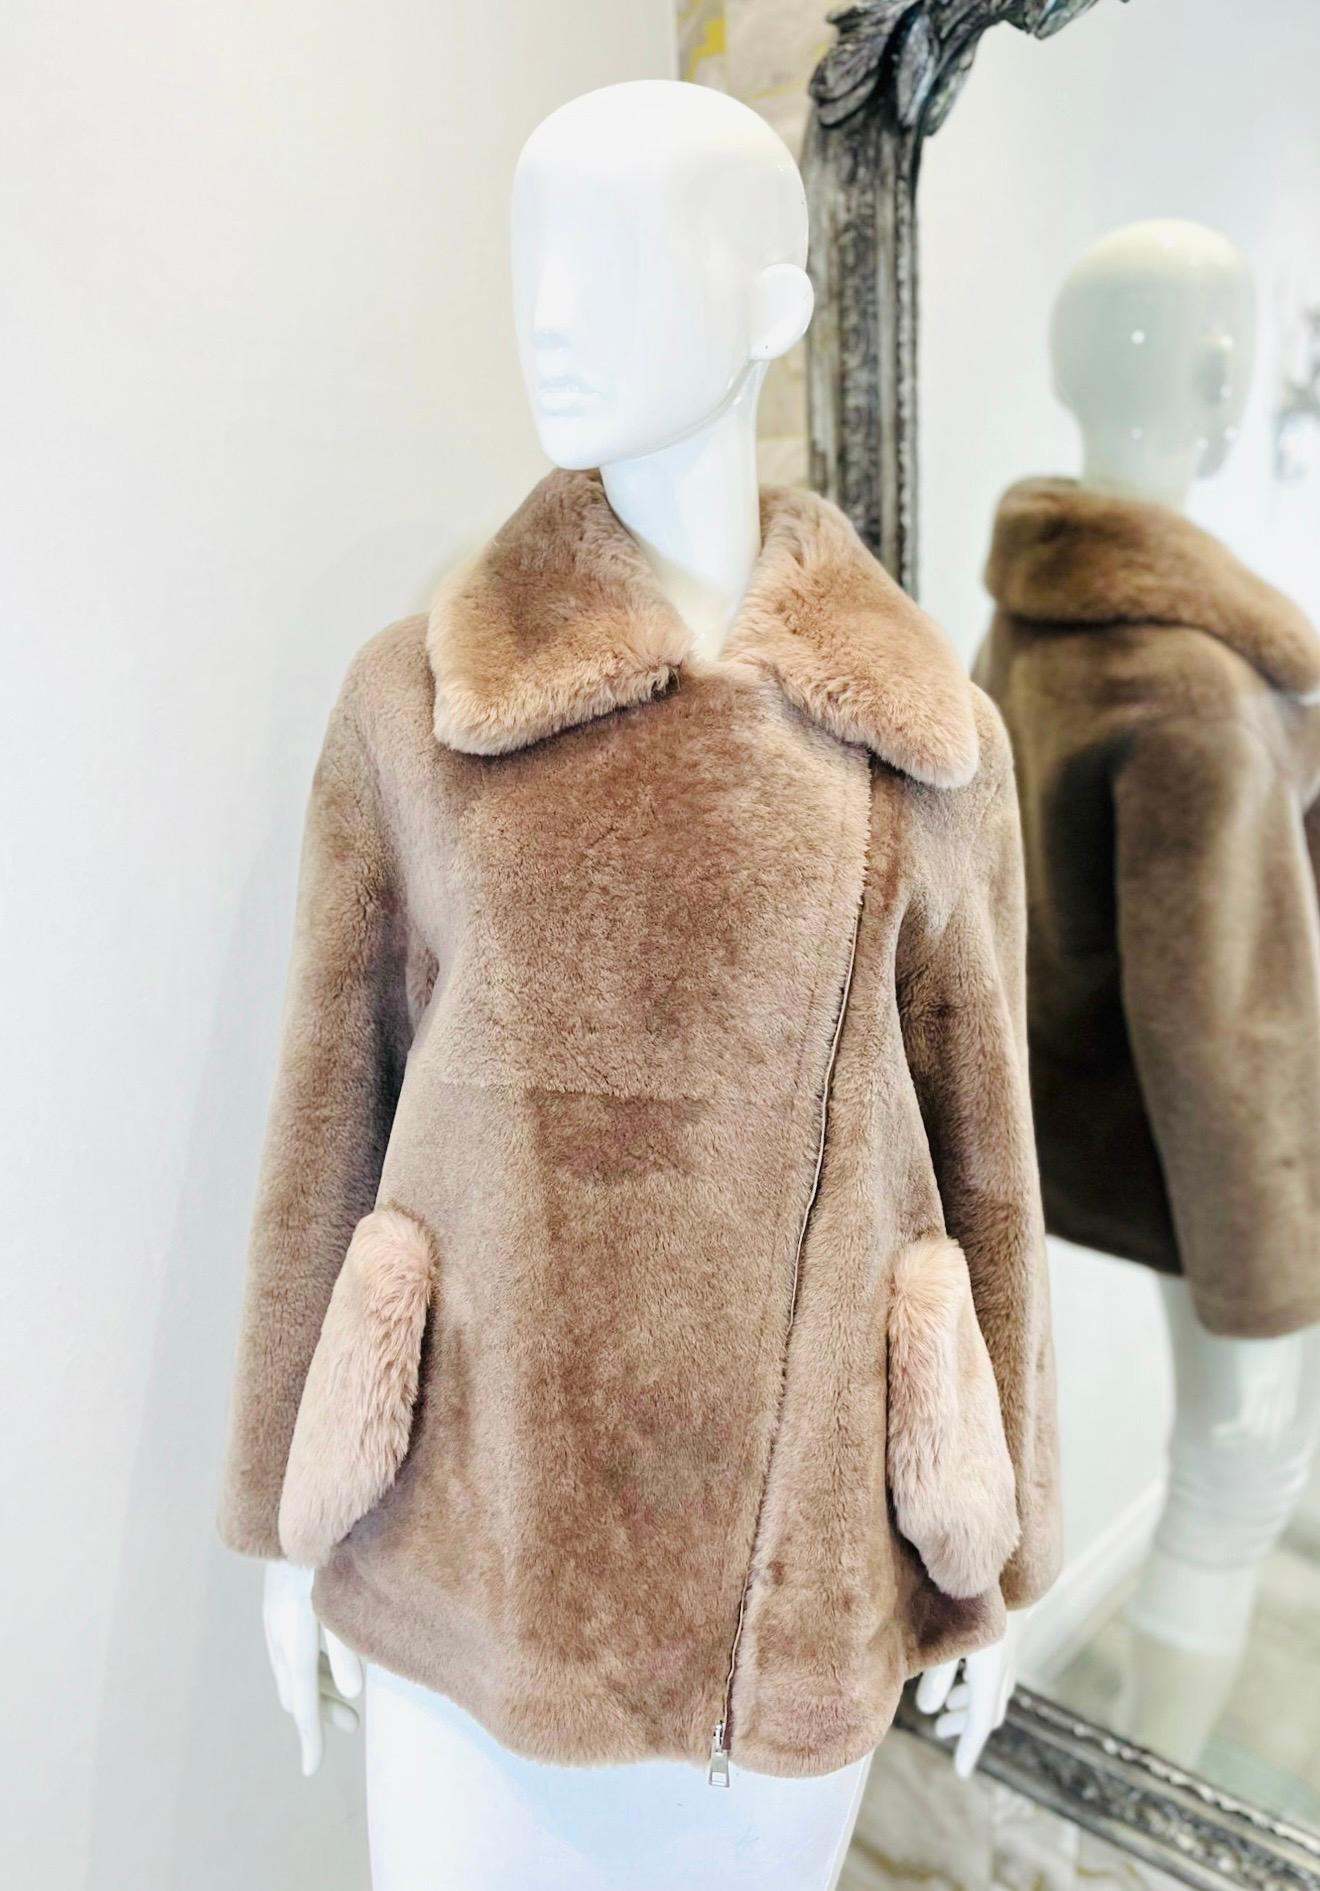 Blancha Sheepskin Teddy Coat

Pinky beige Italian-made coat crafted from plush shearling.

Detailed with oversized collar and side flap pockets, featuring asymmetric zip fastening.

Styled with lambskin leather interior.

Size – 38IT

Condition –